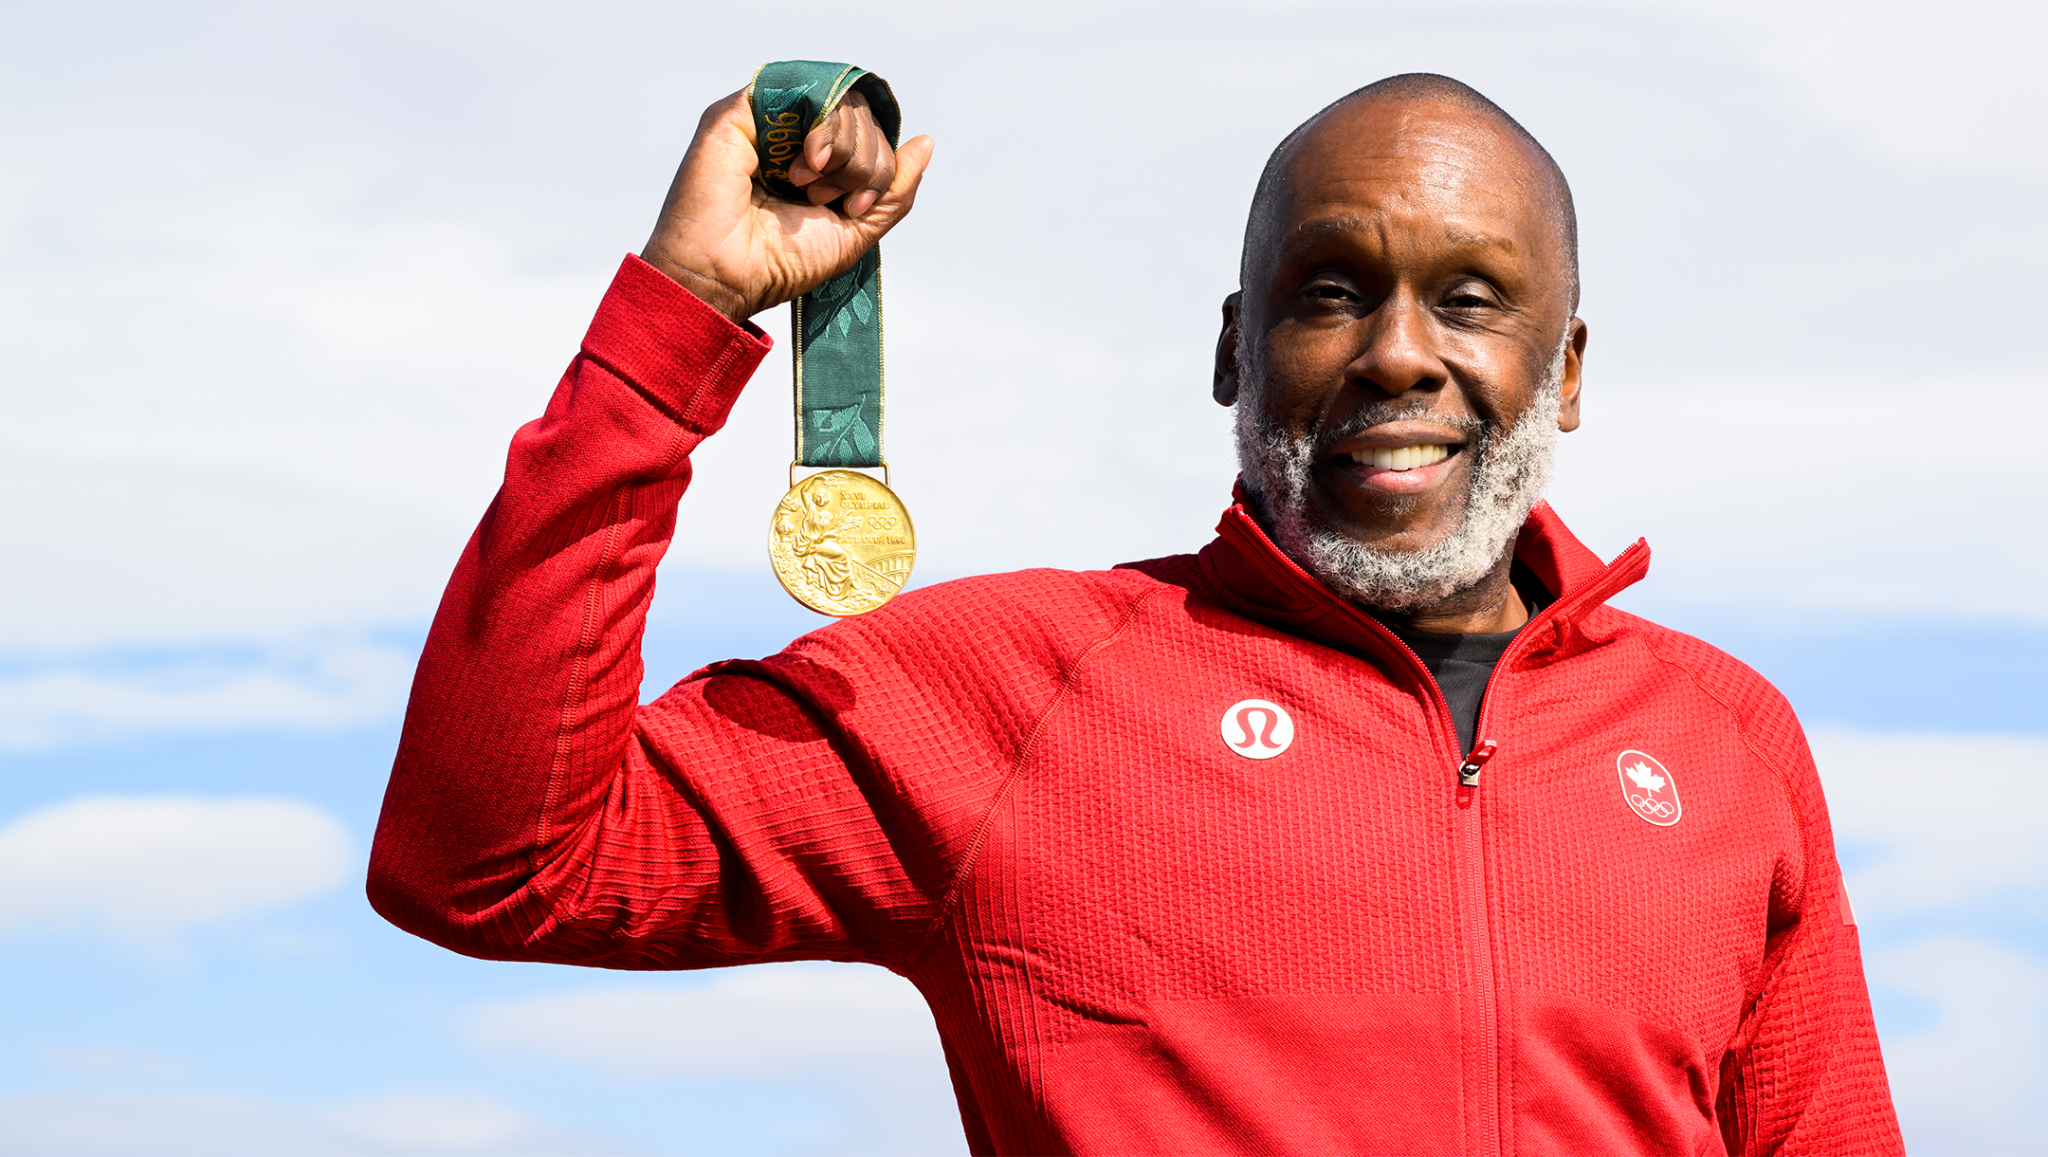 Bruny Surin was a member of Canada's 4x100m relay team that won the Olympic gold medal at Atlanta and will be the country's Chef de Mission at Paris 2024 ©COF